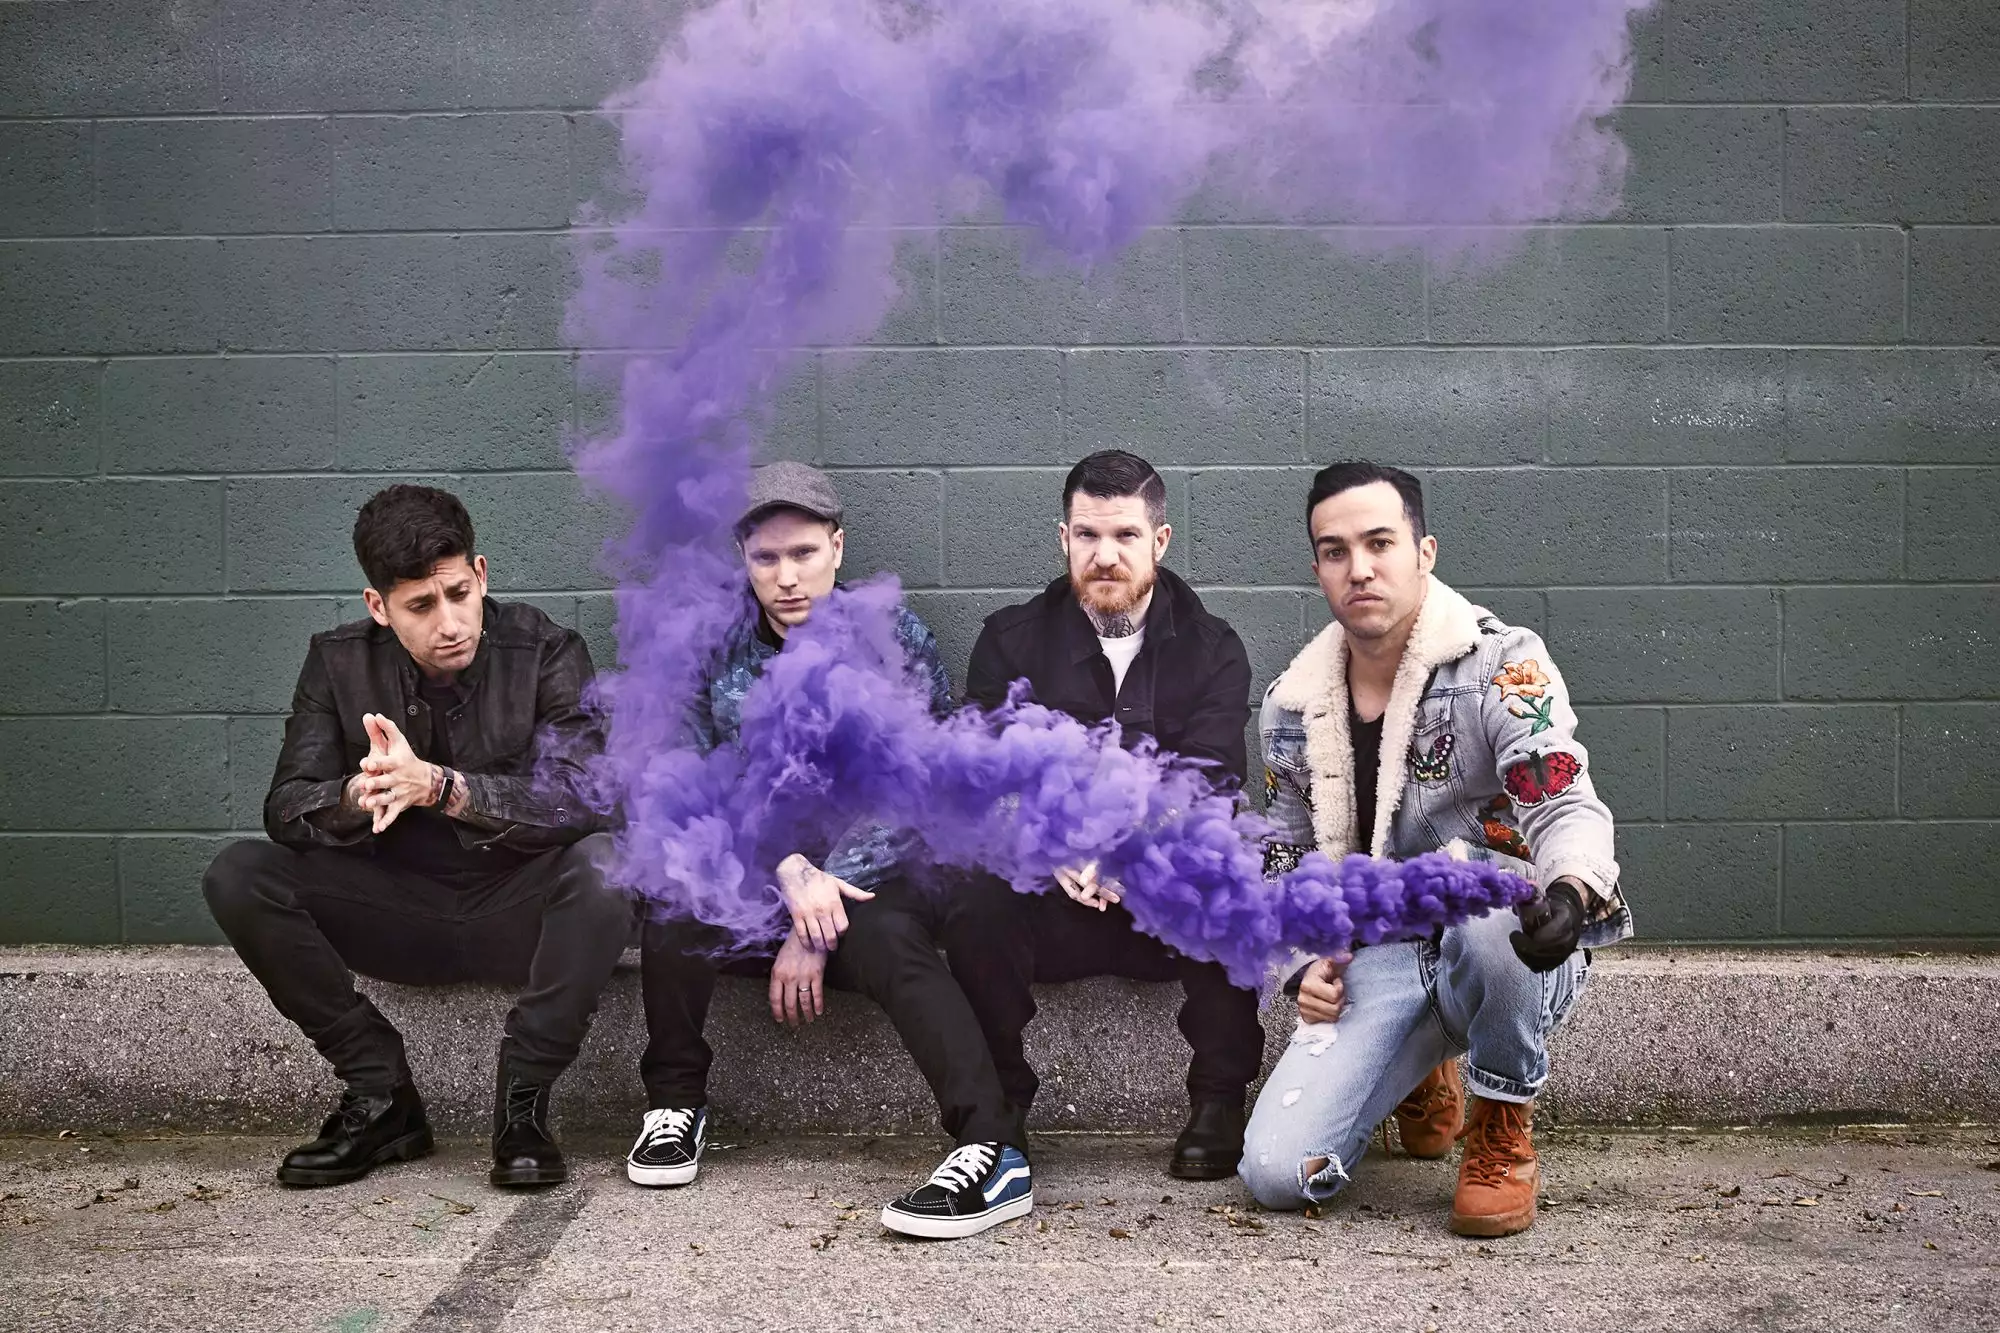 Fall Out Boy in a photoshoot for Entertainment Weekly